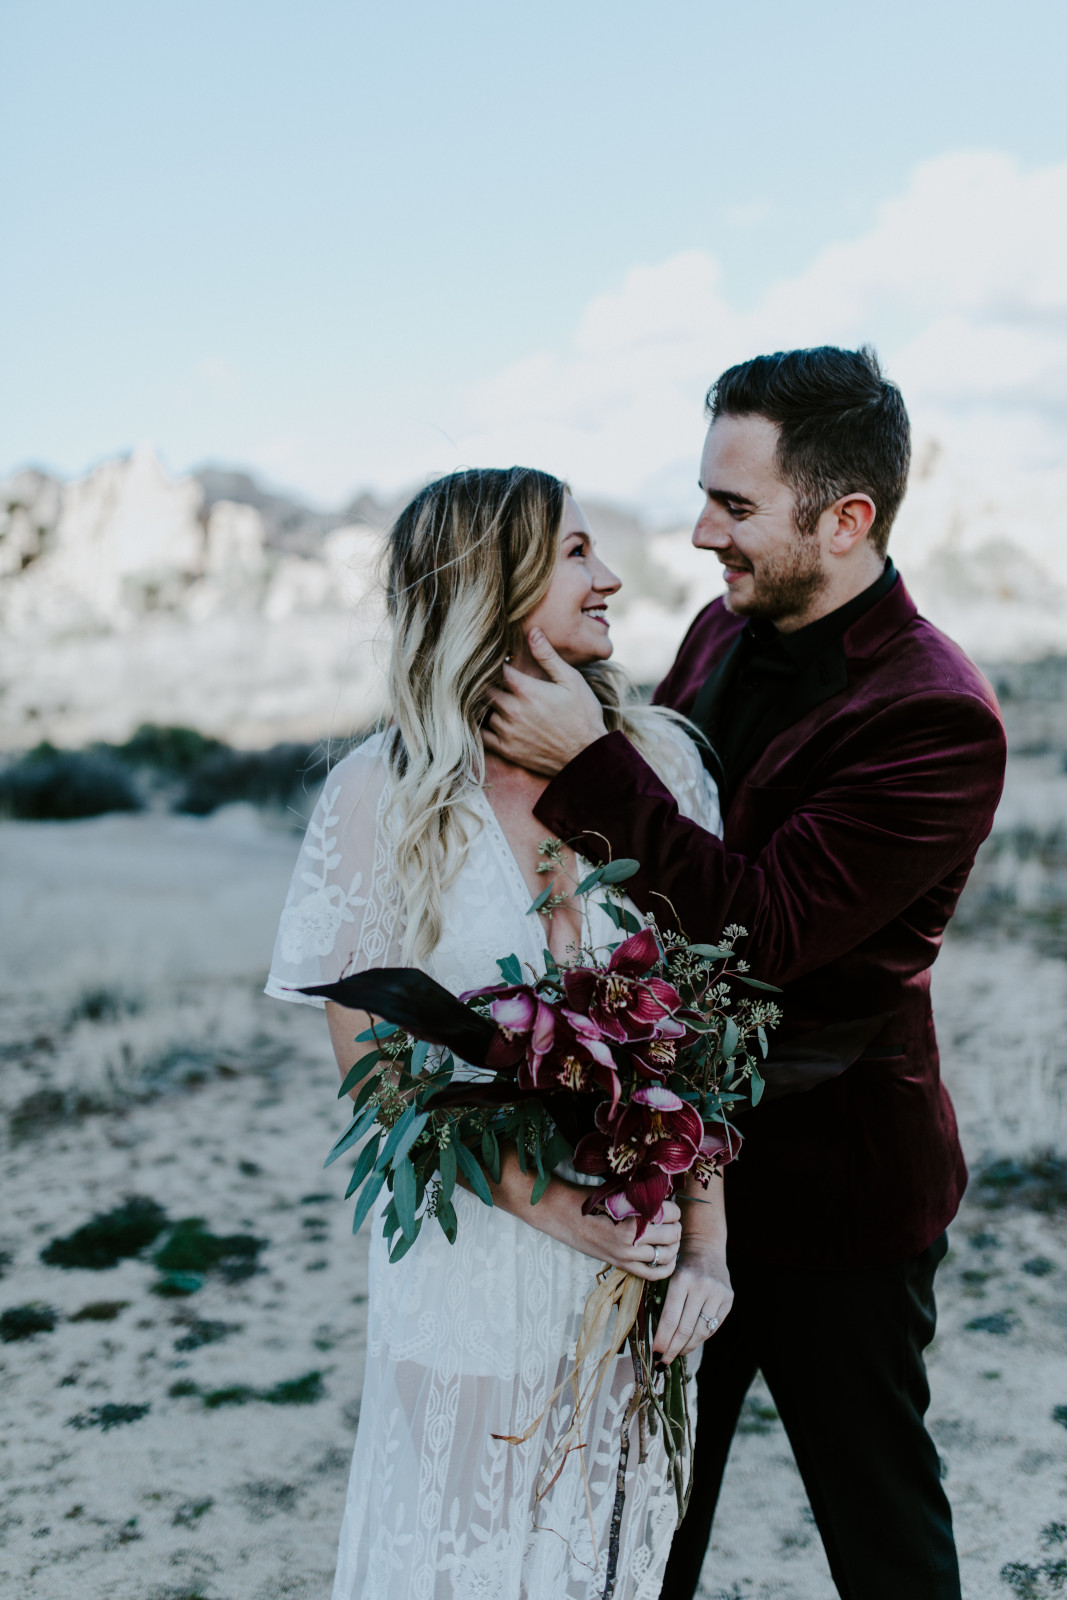 Alyssa and Jeremy stand side by side at Joshua Tree National Park. Elopement wedding photography at Joshua Tree National Park by Sienna Plus Josh.